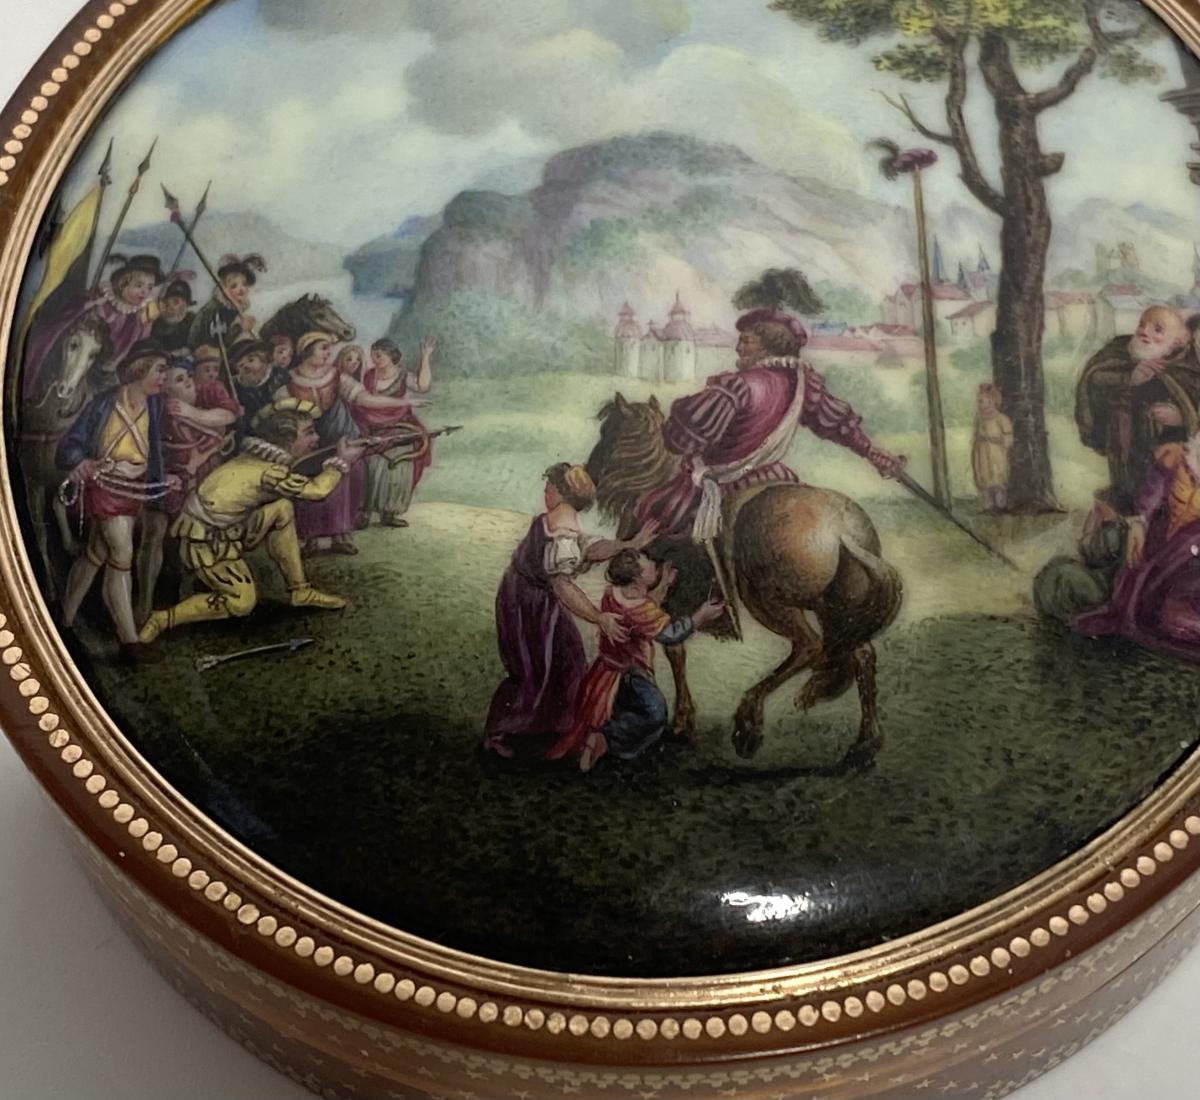 French gold pique enamel and horn box, William Tell, circa 1790